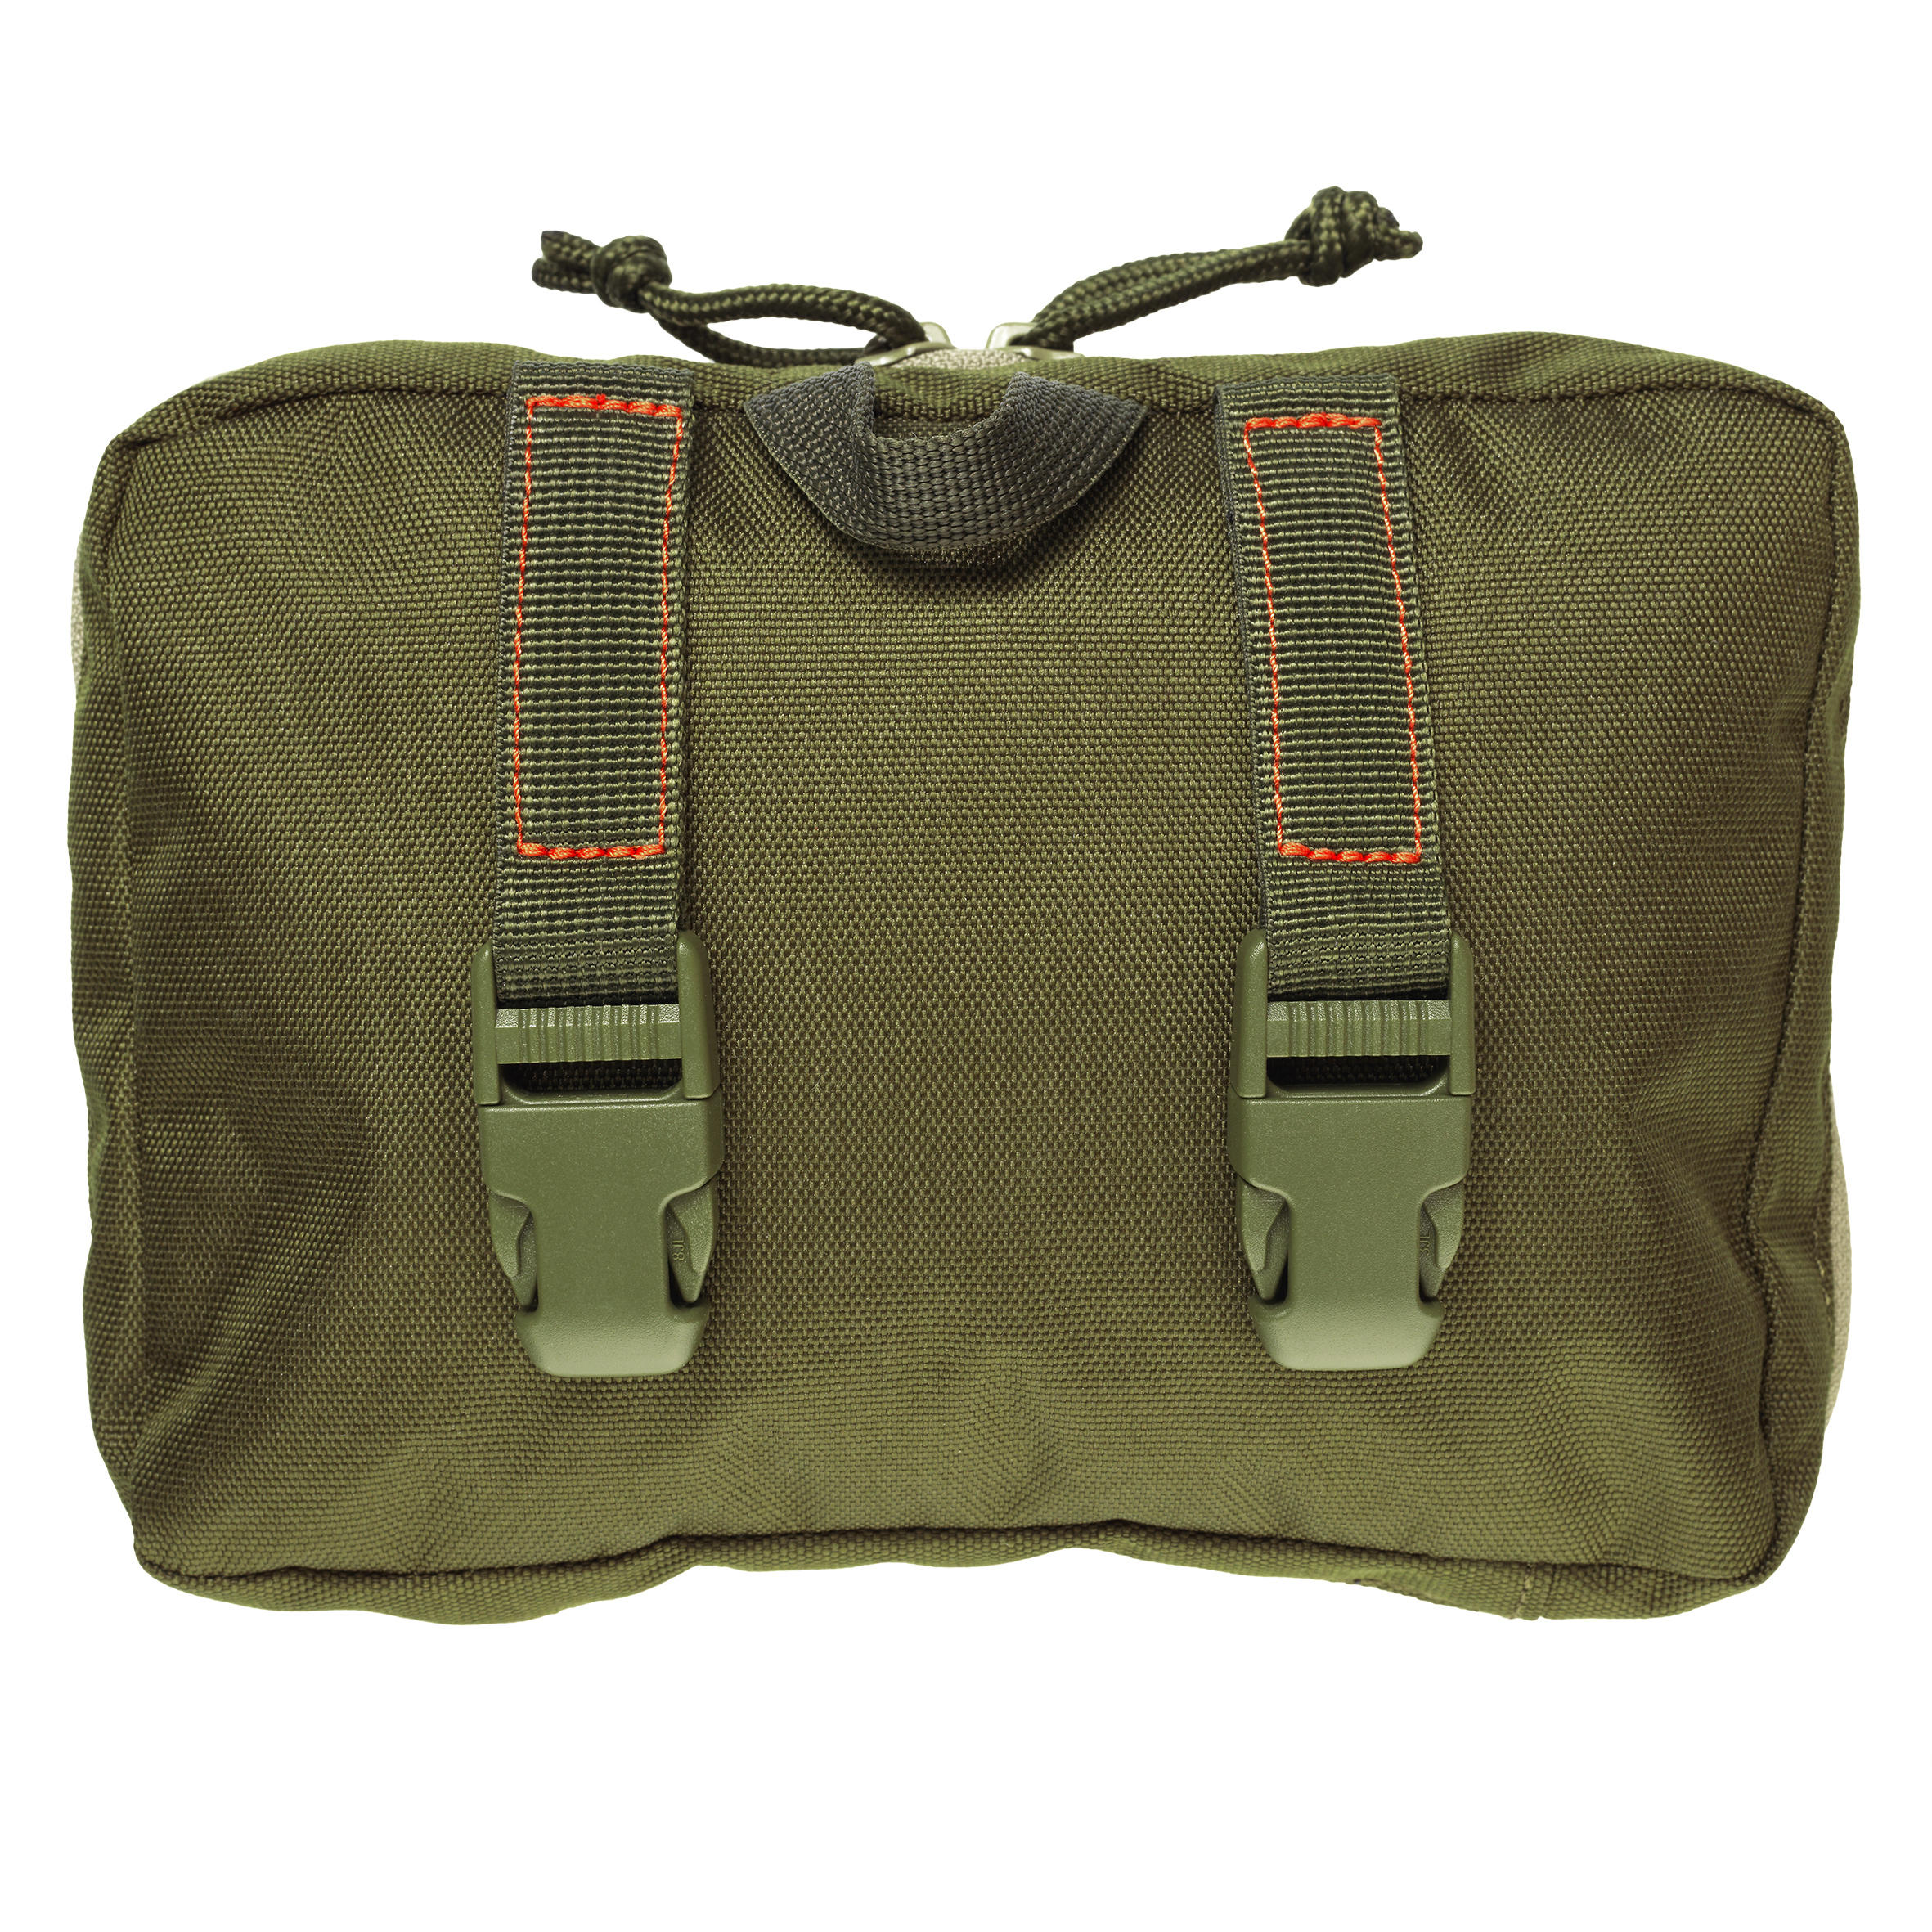 X-Access Hunting Pouch with Secure Zipped Compartments - Green - SOLOGNAC